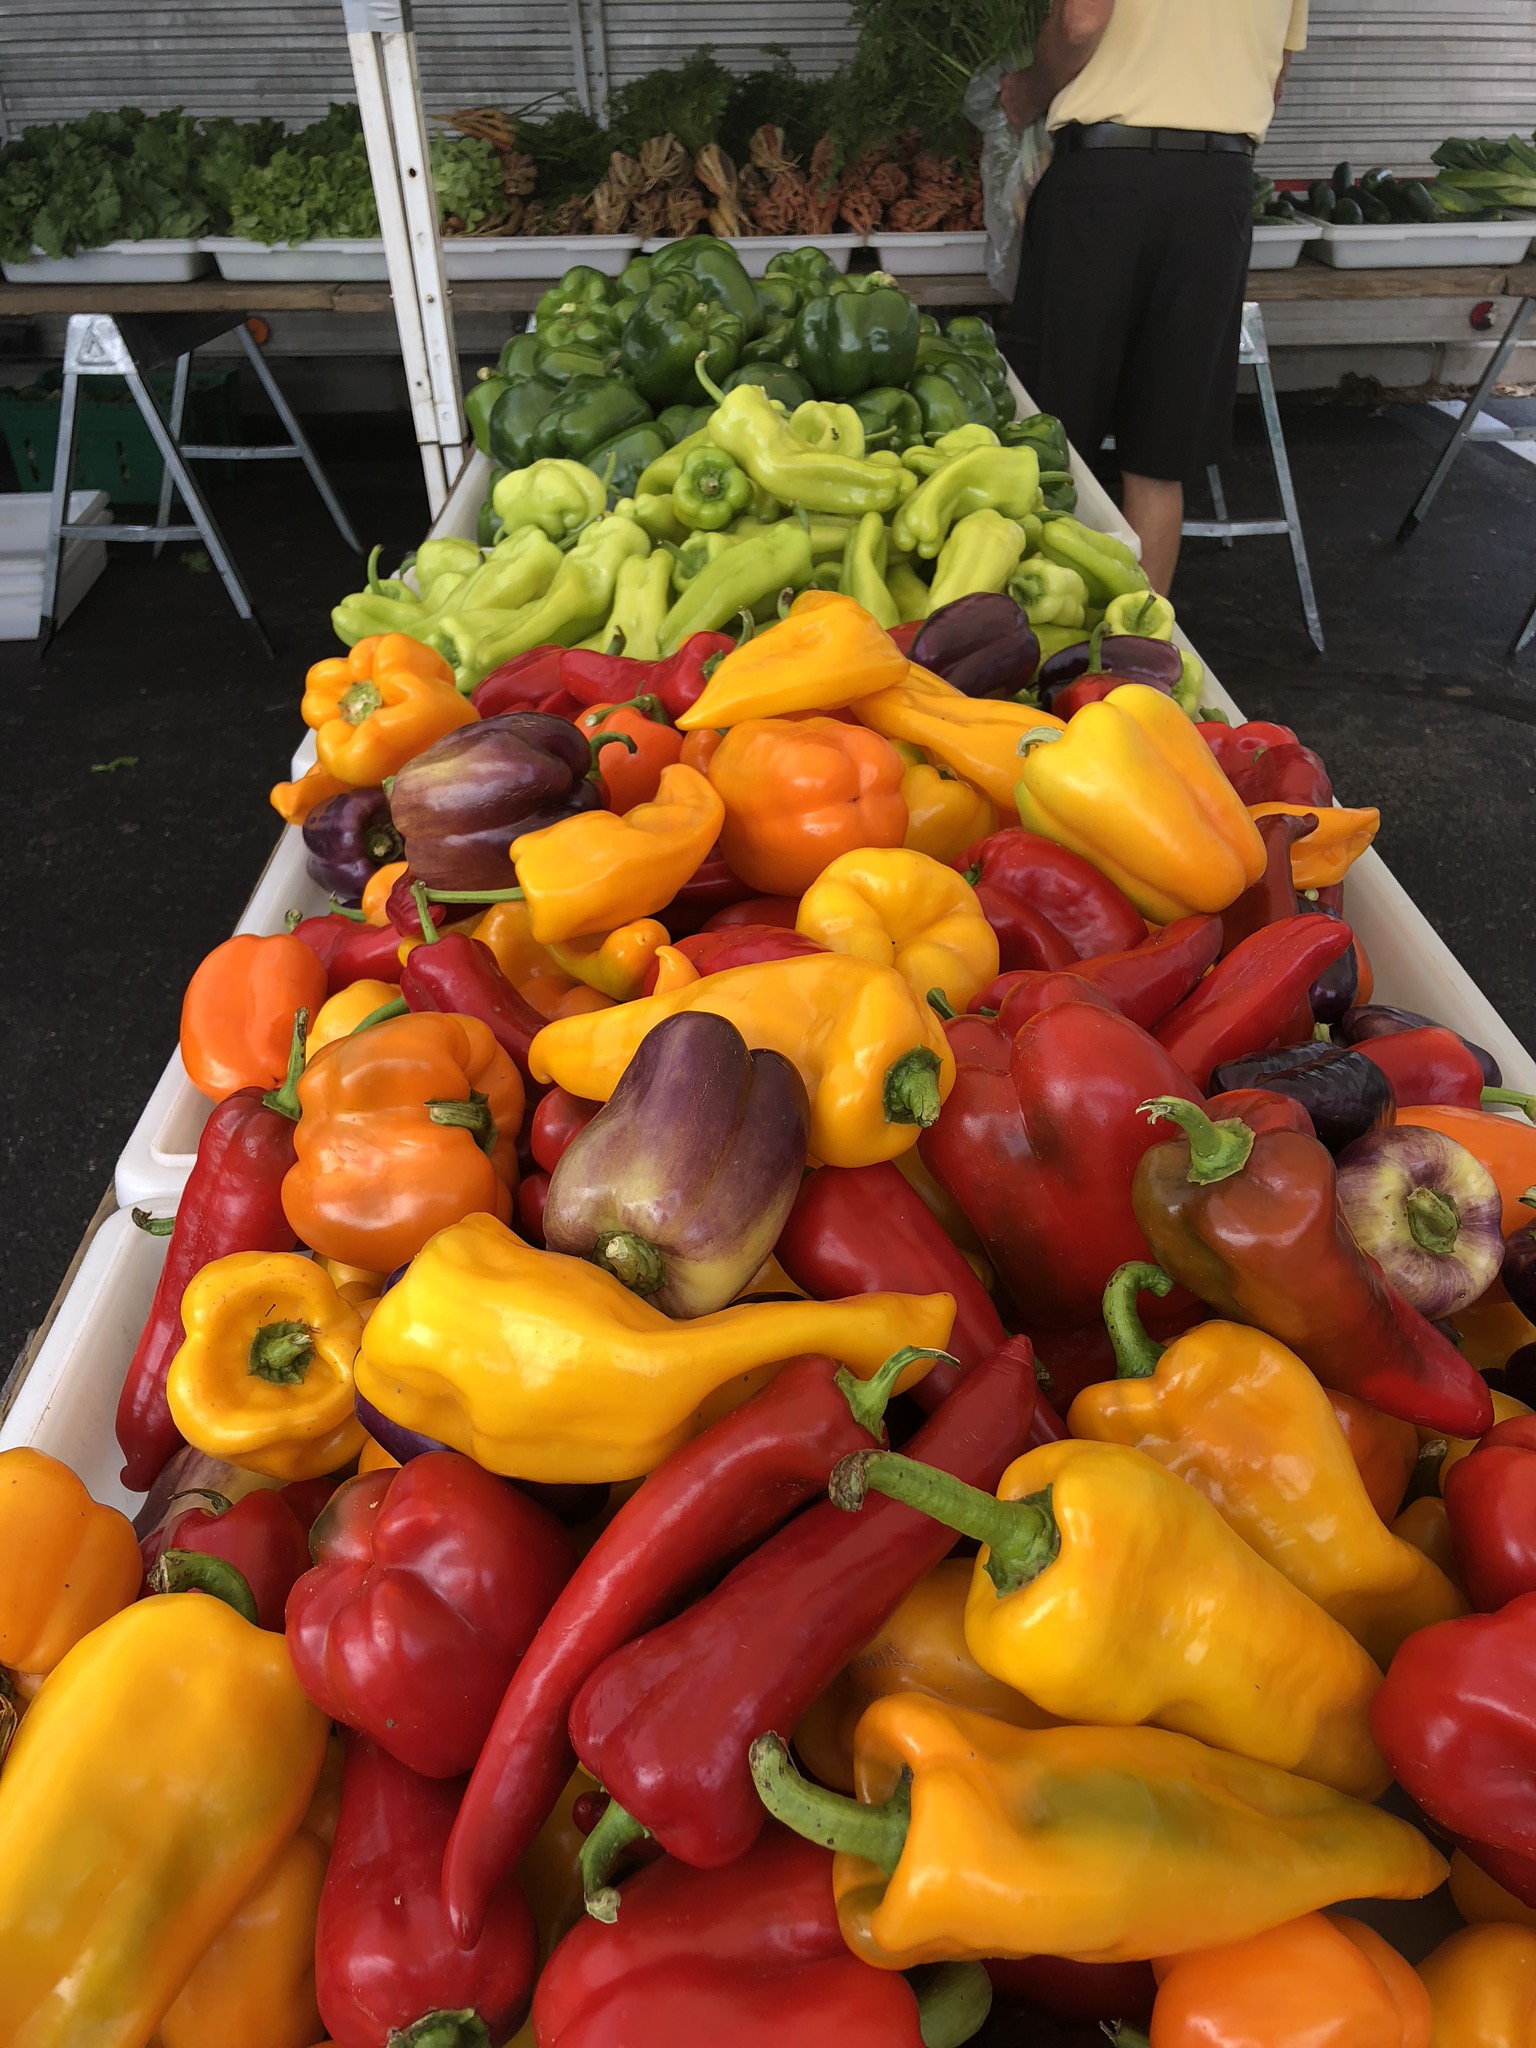 Peppers at the Farmers Market